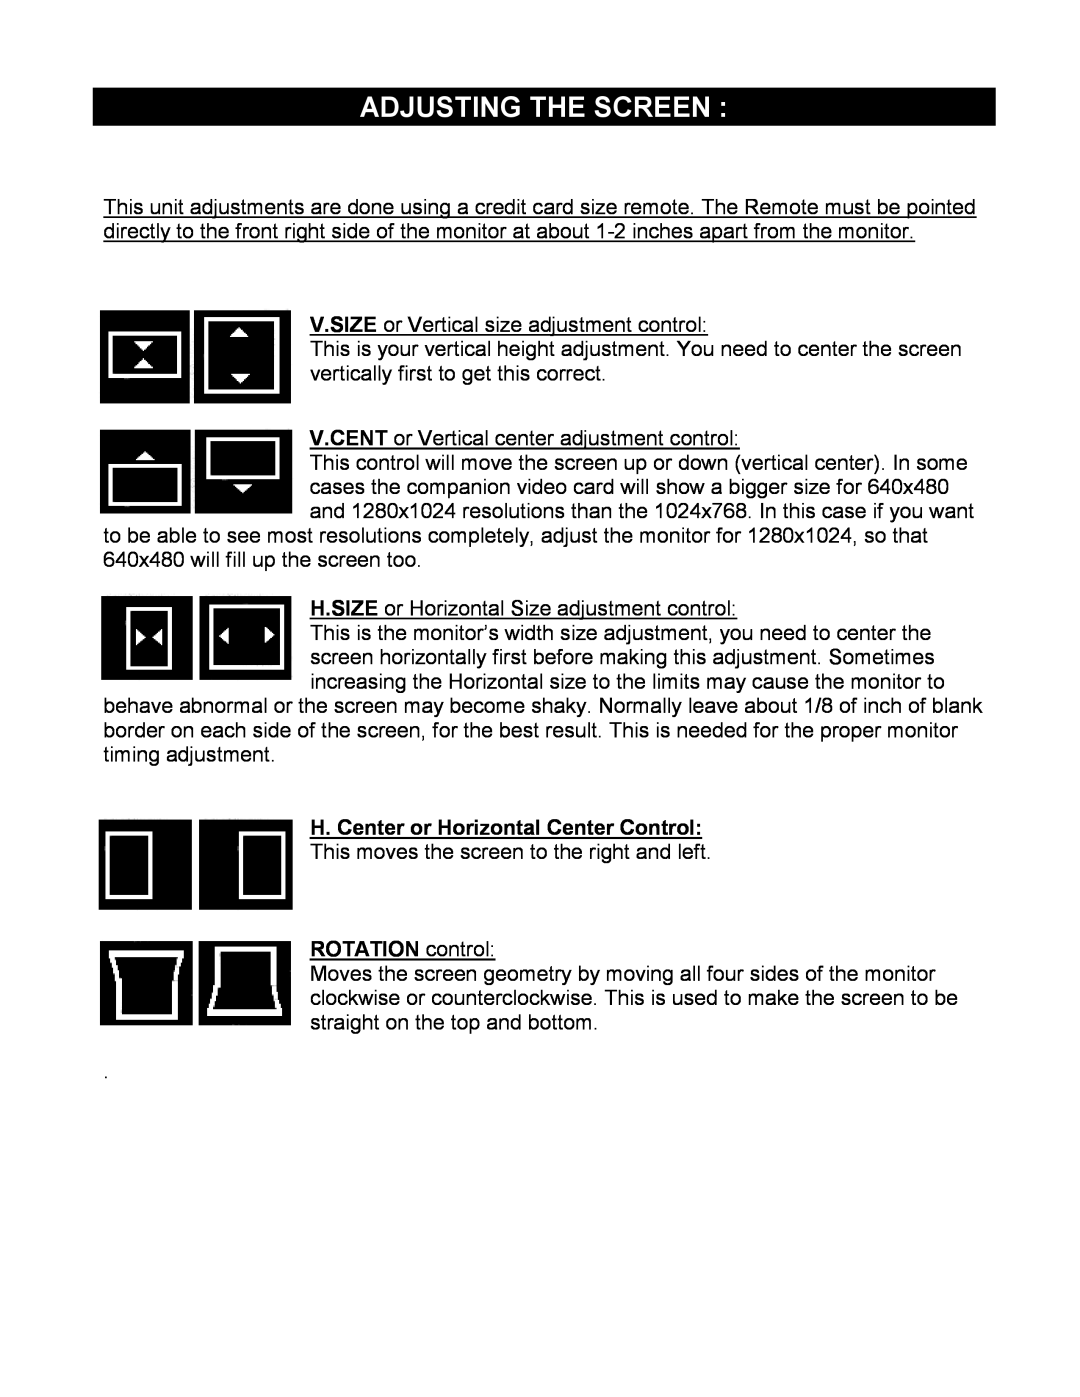 Sony GDM-20D10-15 installation manual Adjusting The Screen, H. Center or Horizontal Center Control, ROTATION control 